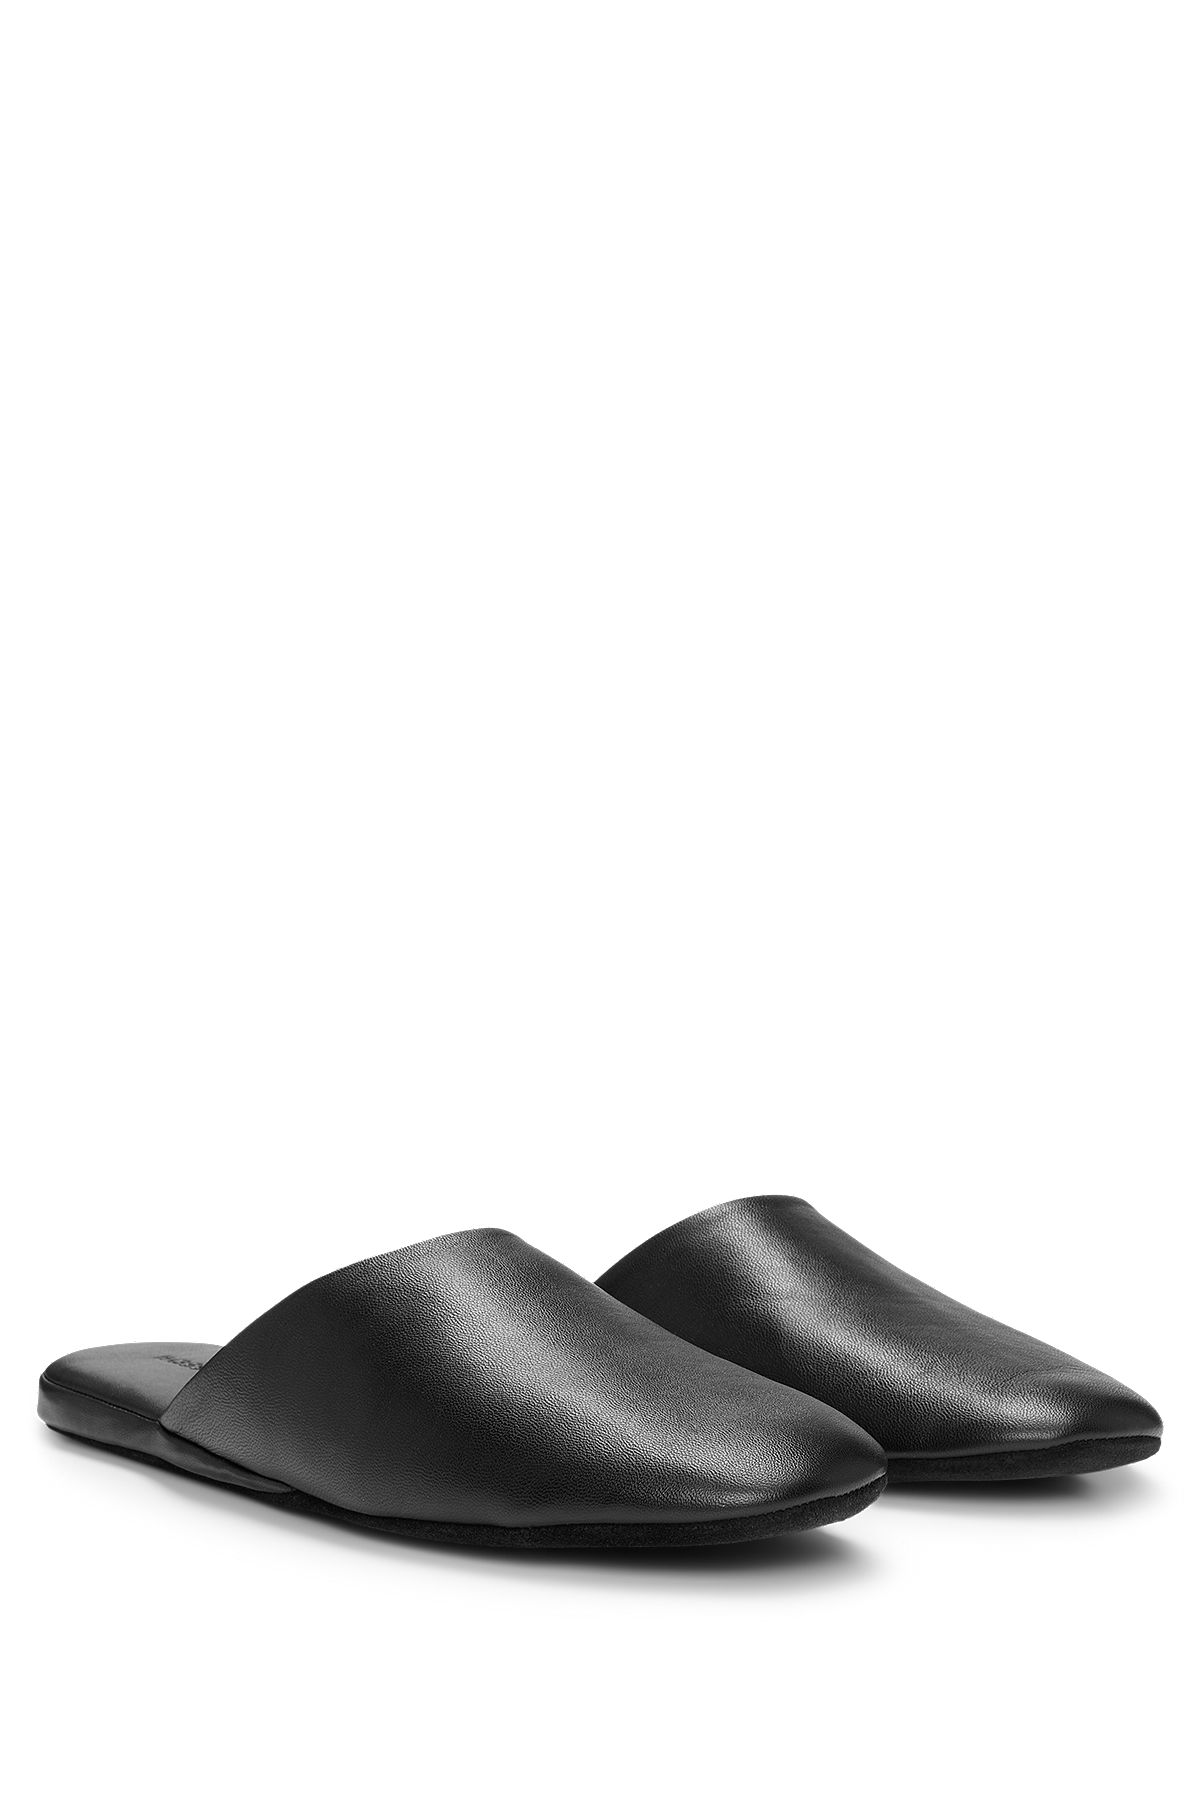 Travel slippers in soft leather, Black